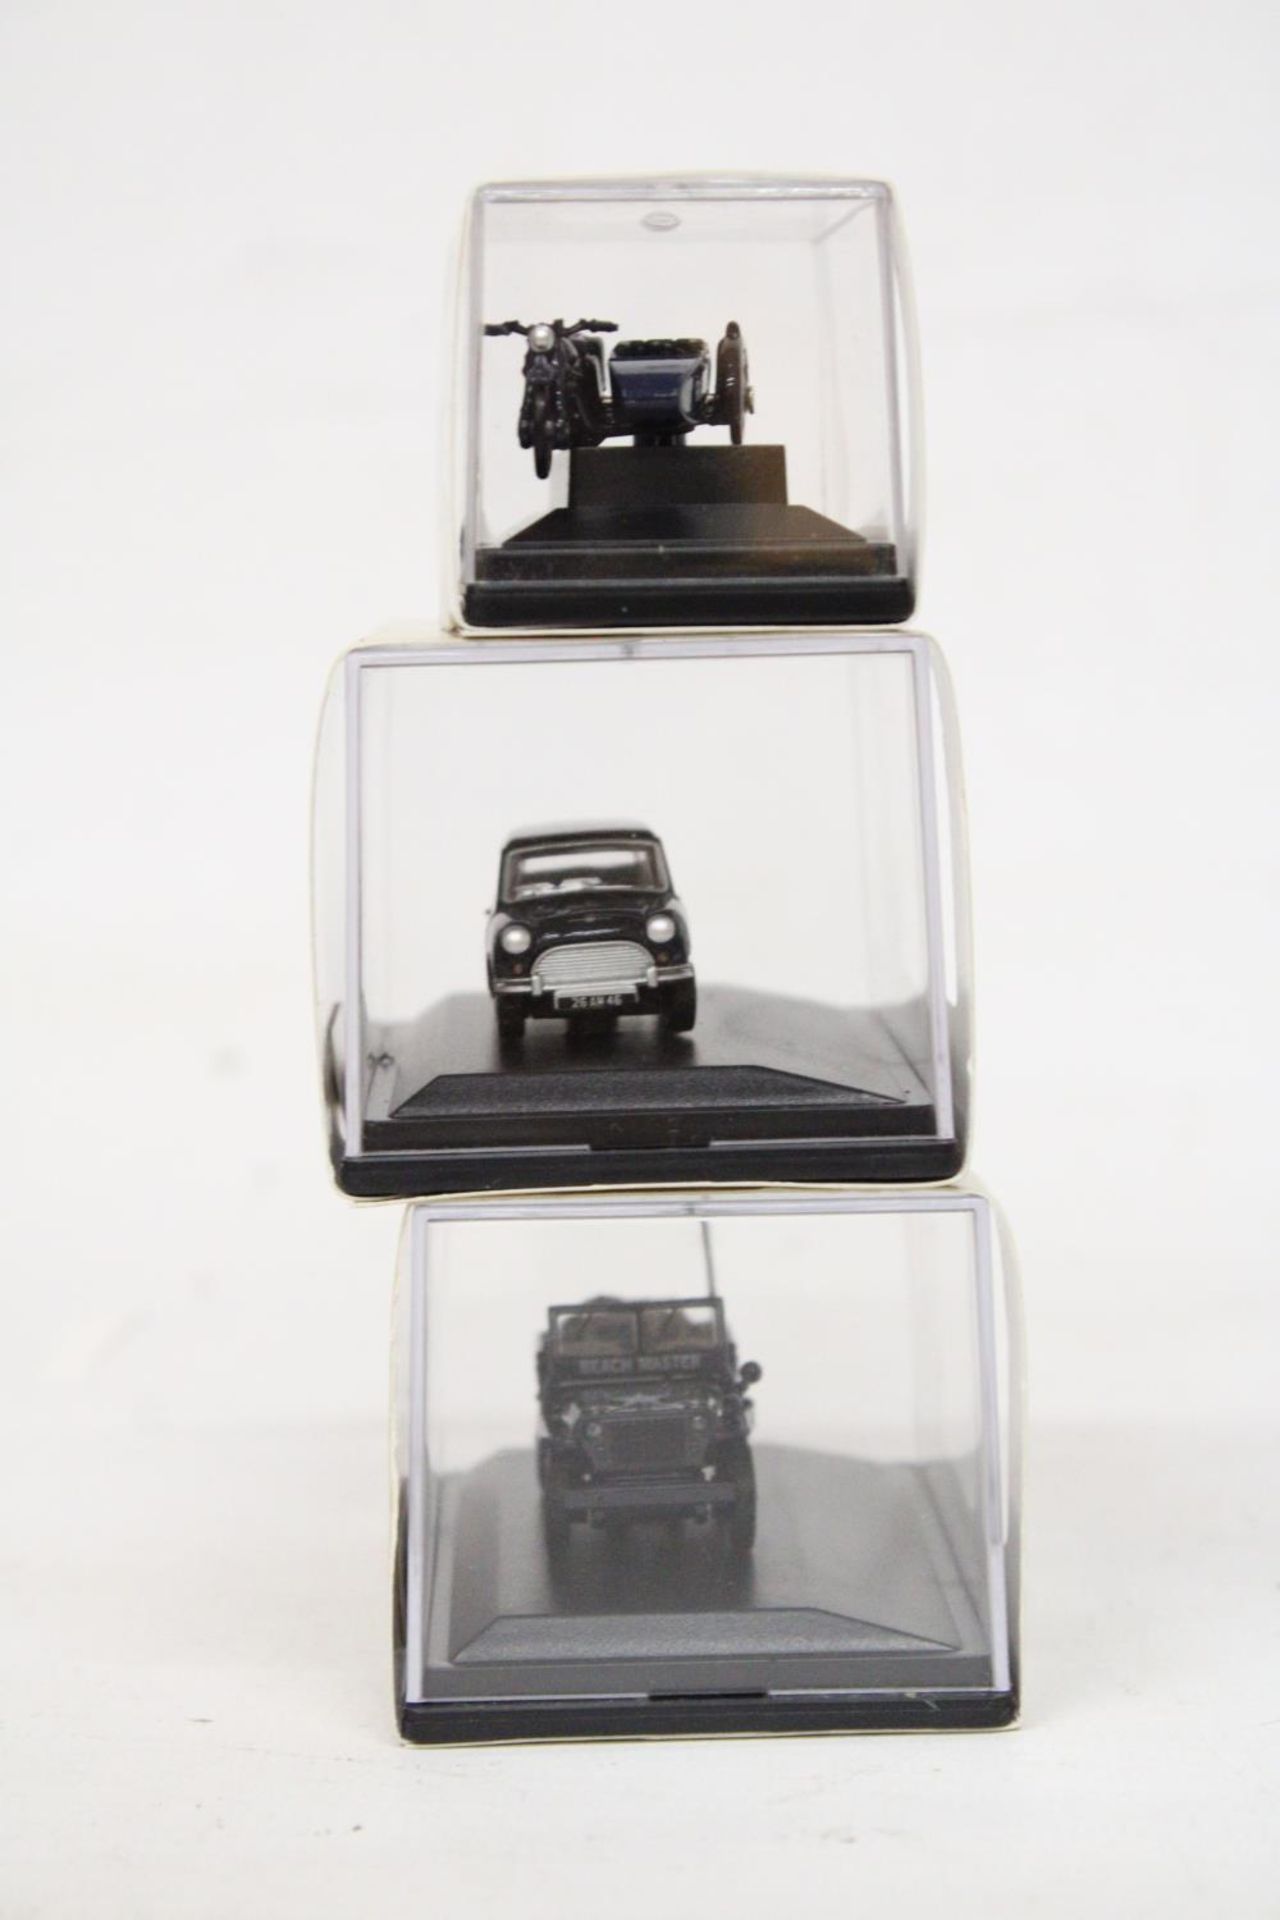 EIGHT AS NEW AND BOXED OXFORD MILITARY VEHICLES - Image 5 of 6